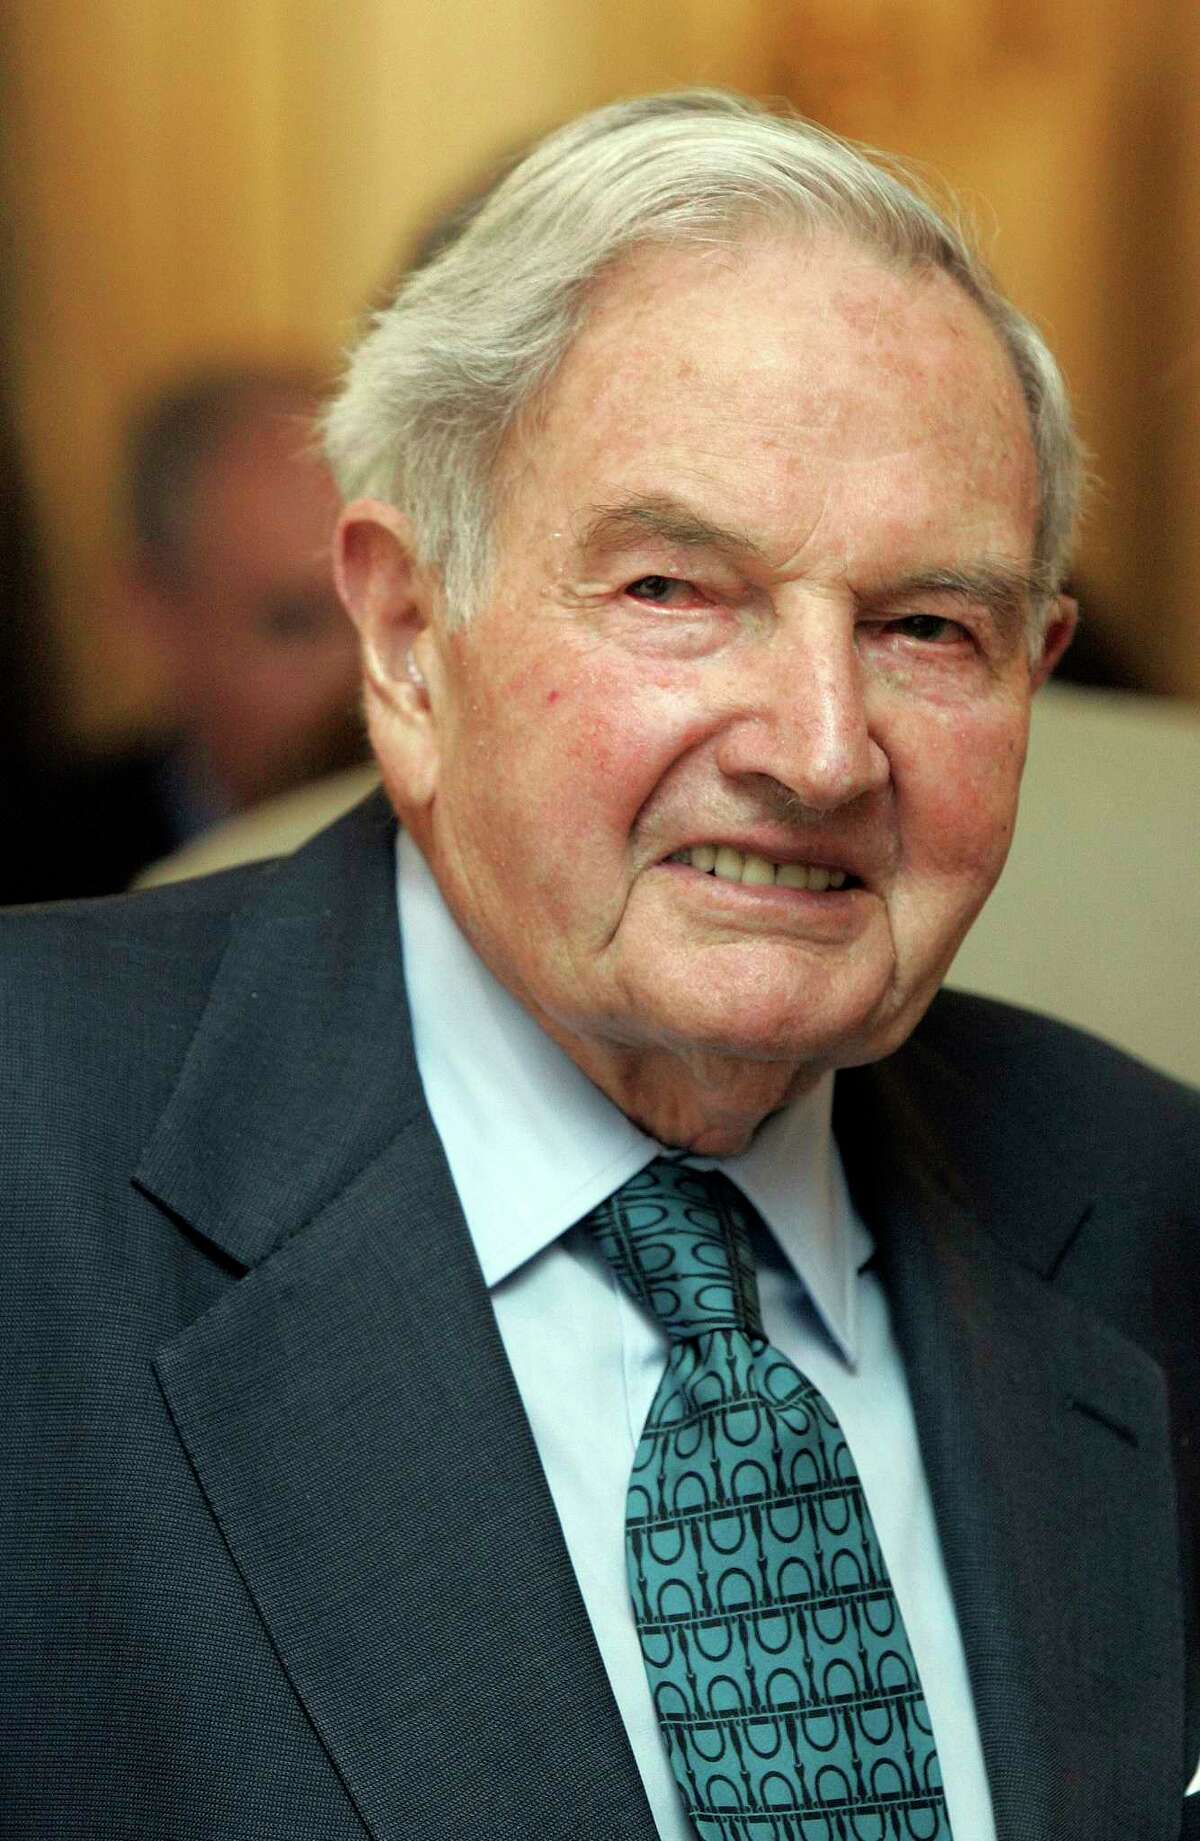 12. David Rockefeller Source of wealth: Family wealth Total given: $202 million Recipients: Council on Foreign Relations; Museum of Modern Art; Mount Desert Land & Garden Preserve; Americas Society (New York) and other groups